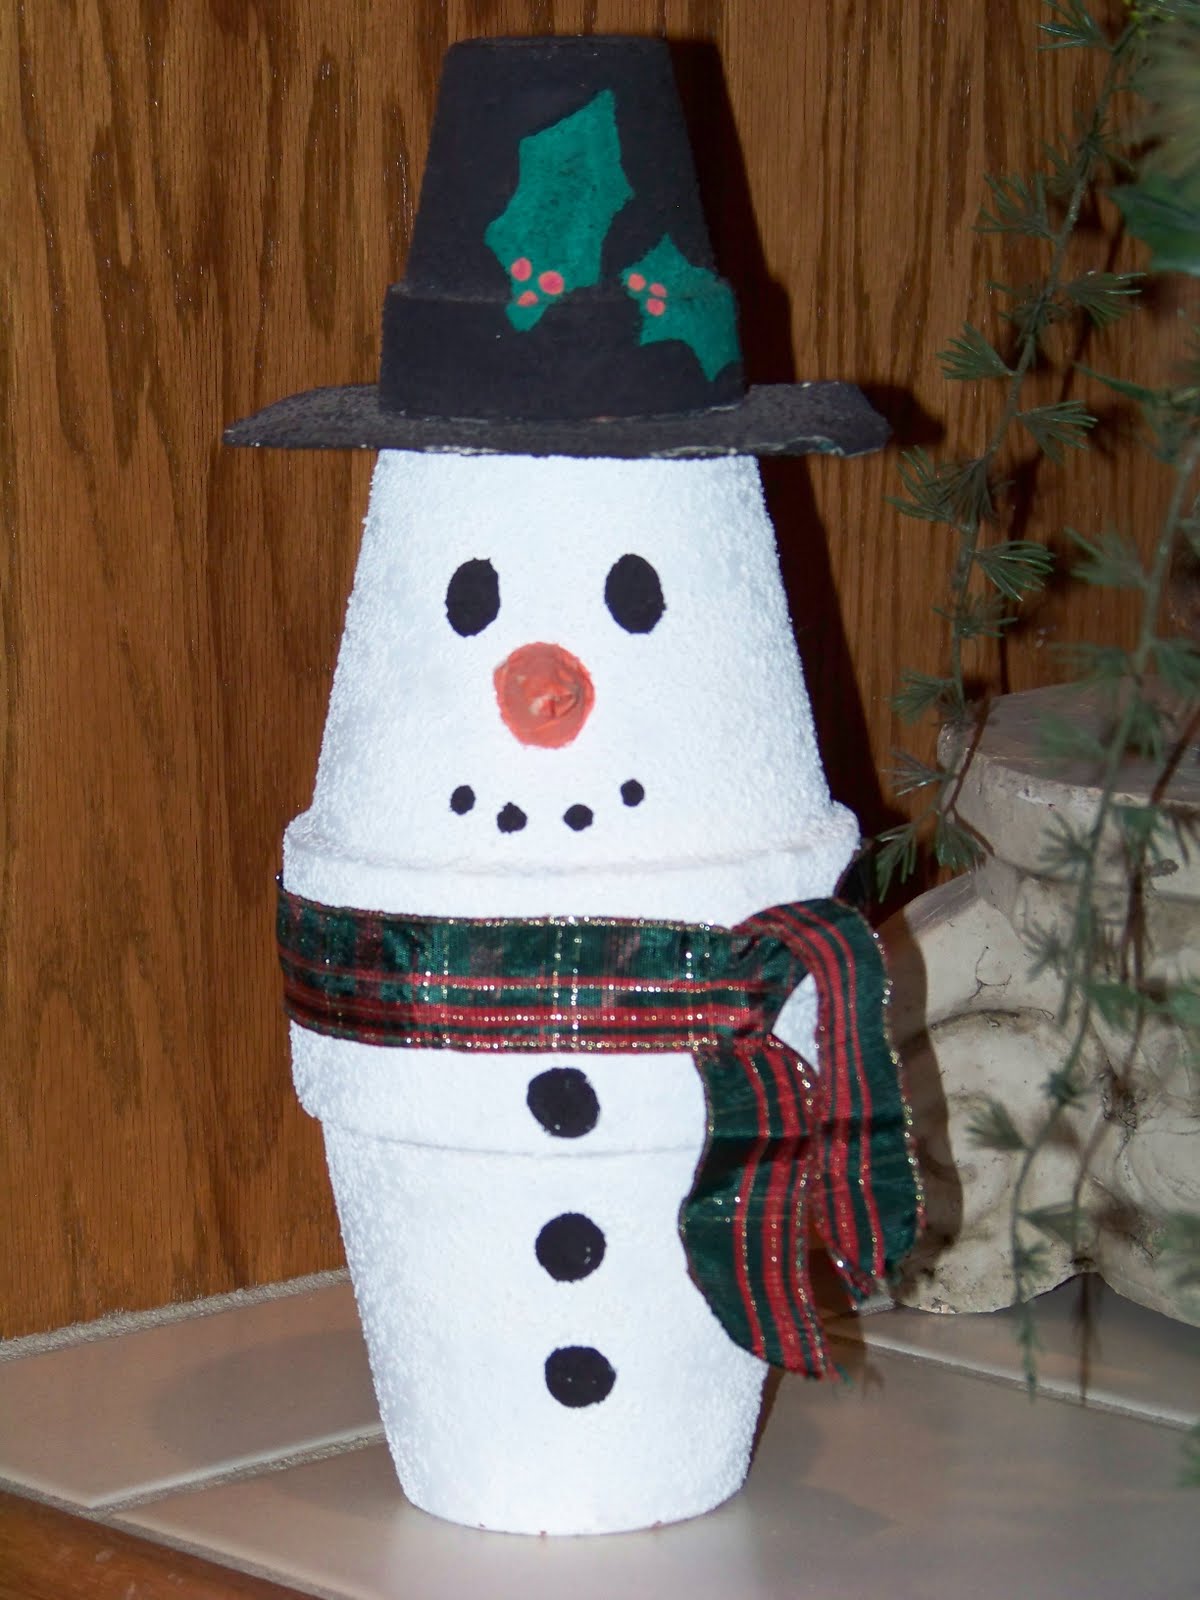 Coastal Home Designs Texas on Silver Trappings  Kids Christmas Craft   Clay Pot Snowman